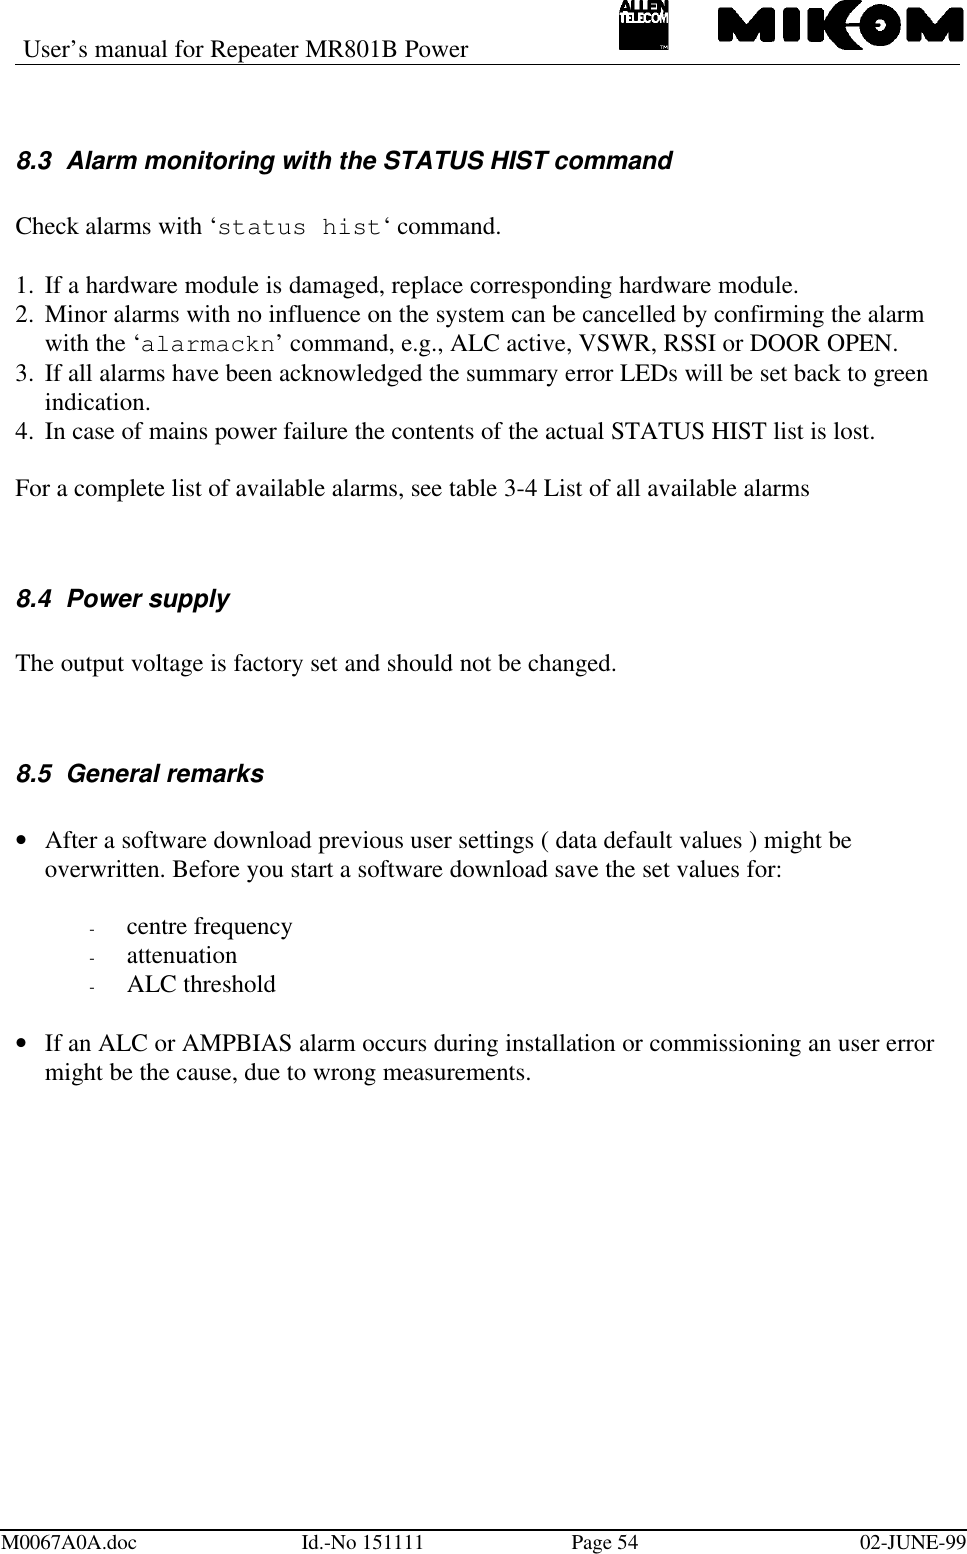 User’s manual for Repeater MR801B PowerM0067A0A.doc Id.-No 151111 Page 54 02-JUNE-998.3 Alarm monitoring with the STATUS HIST commandCheck alarms with ‘status hist‘ command.1.  If a hardware module is damaged, replace corresponding hardware module.2.  Minor alarms with no influence on the system can be cancelled by confirming the alarmwith the ‘alarmackn’ command, e.g., ALC active, VSWR, RSSI or DOOR OPEN.3.  If all alarms have been acknowledged the summary error LEDs will be set back to greenindication.4.  In case of mains power failure the contents of the actual STATUS HIST list is lost.For a complete list of available alarms, see table 3-4 List of all available alarms8.4 Power supplyThe output voltage is factory set and should not be changed.8.5 General remarks• After a software download previous user settings ( data default values ) might beoverwritten. Before you start a software download save the set values for:- centre frequency- attenuation- ALC threshold• If an ALC or AMPBIAS alarm occurs during installation or commissioning an user errormight be the cause, due to wrong measurements.